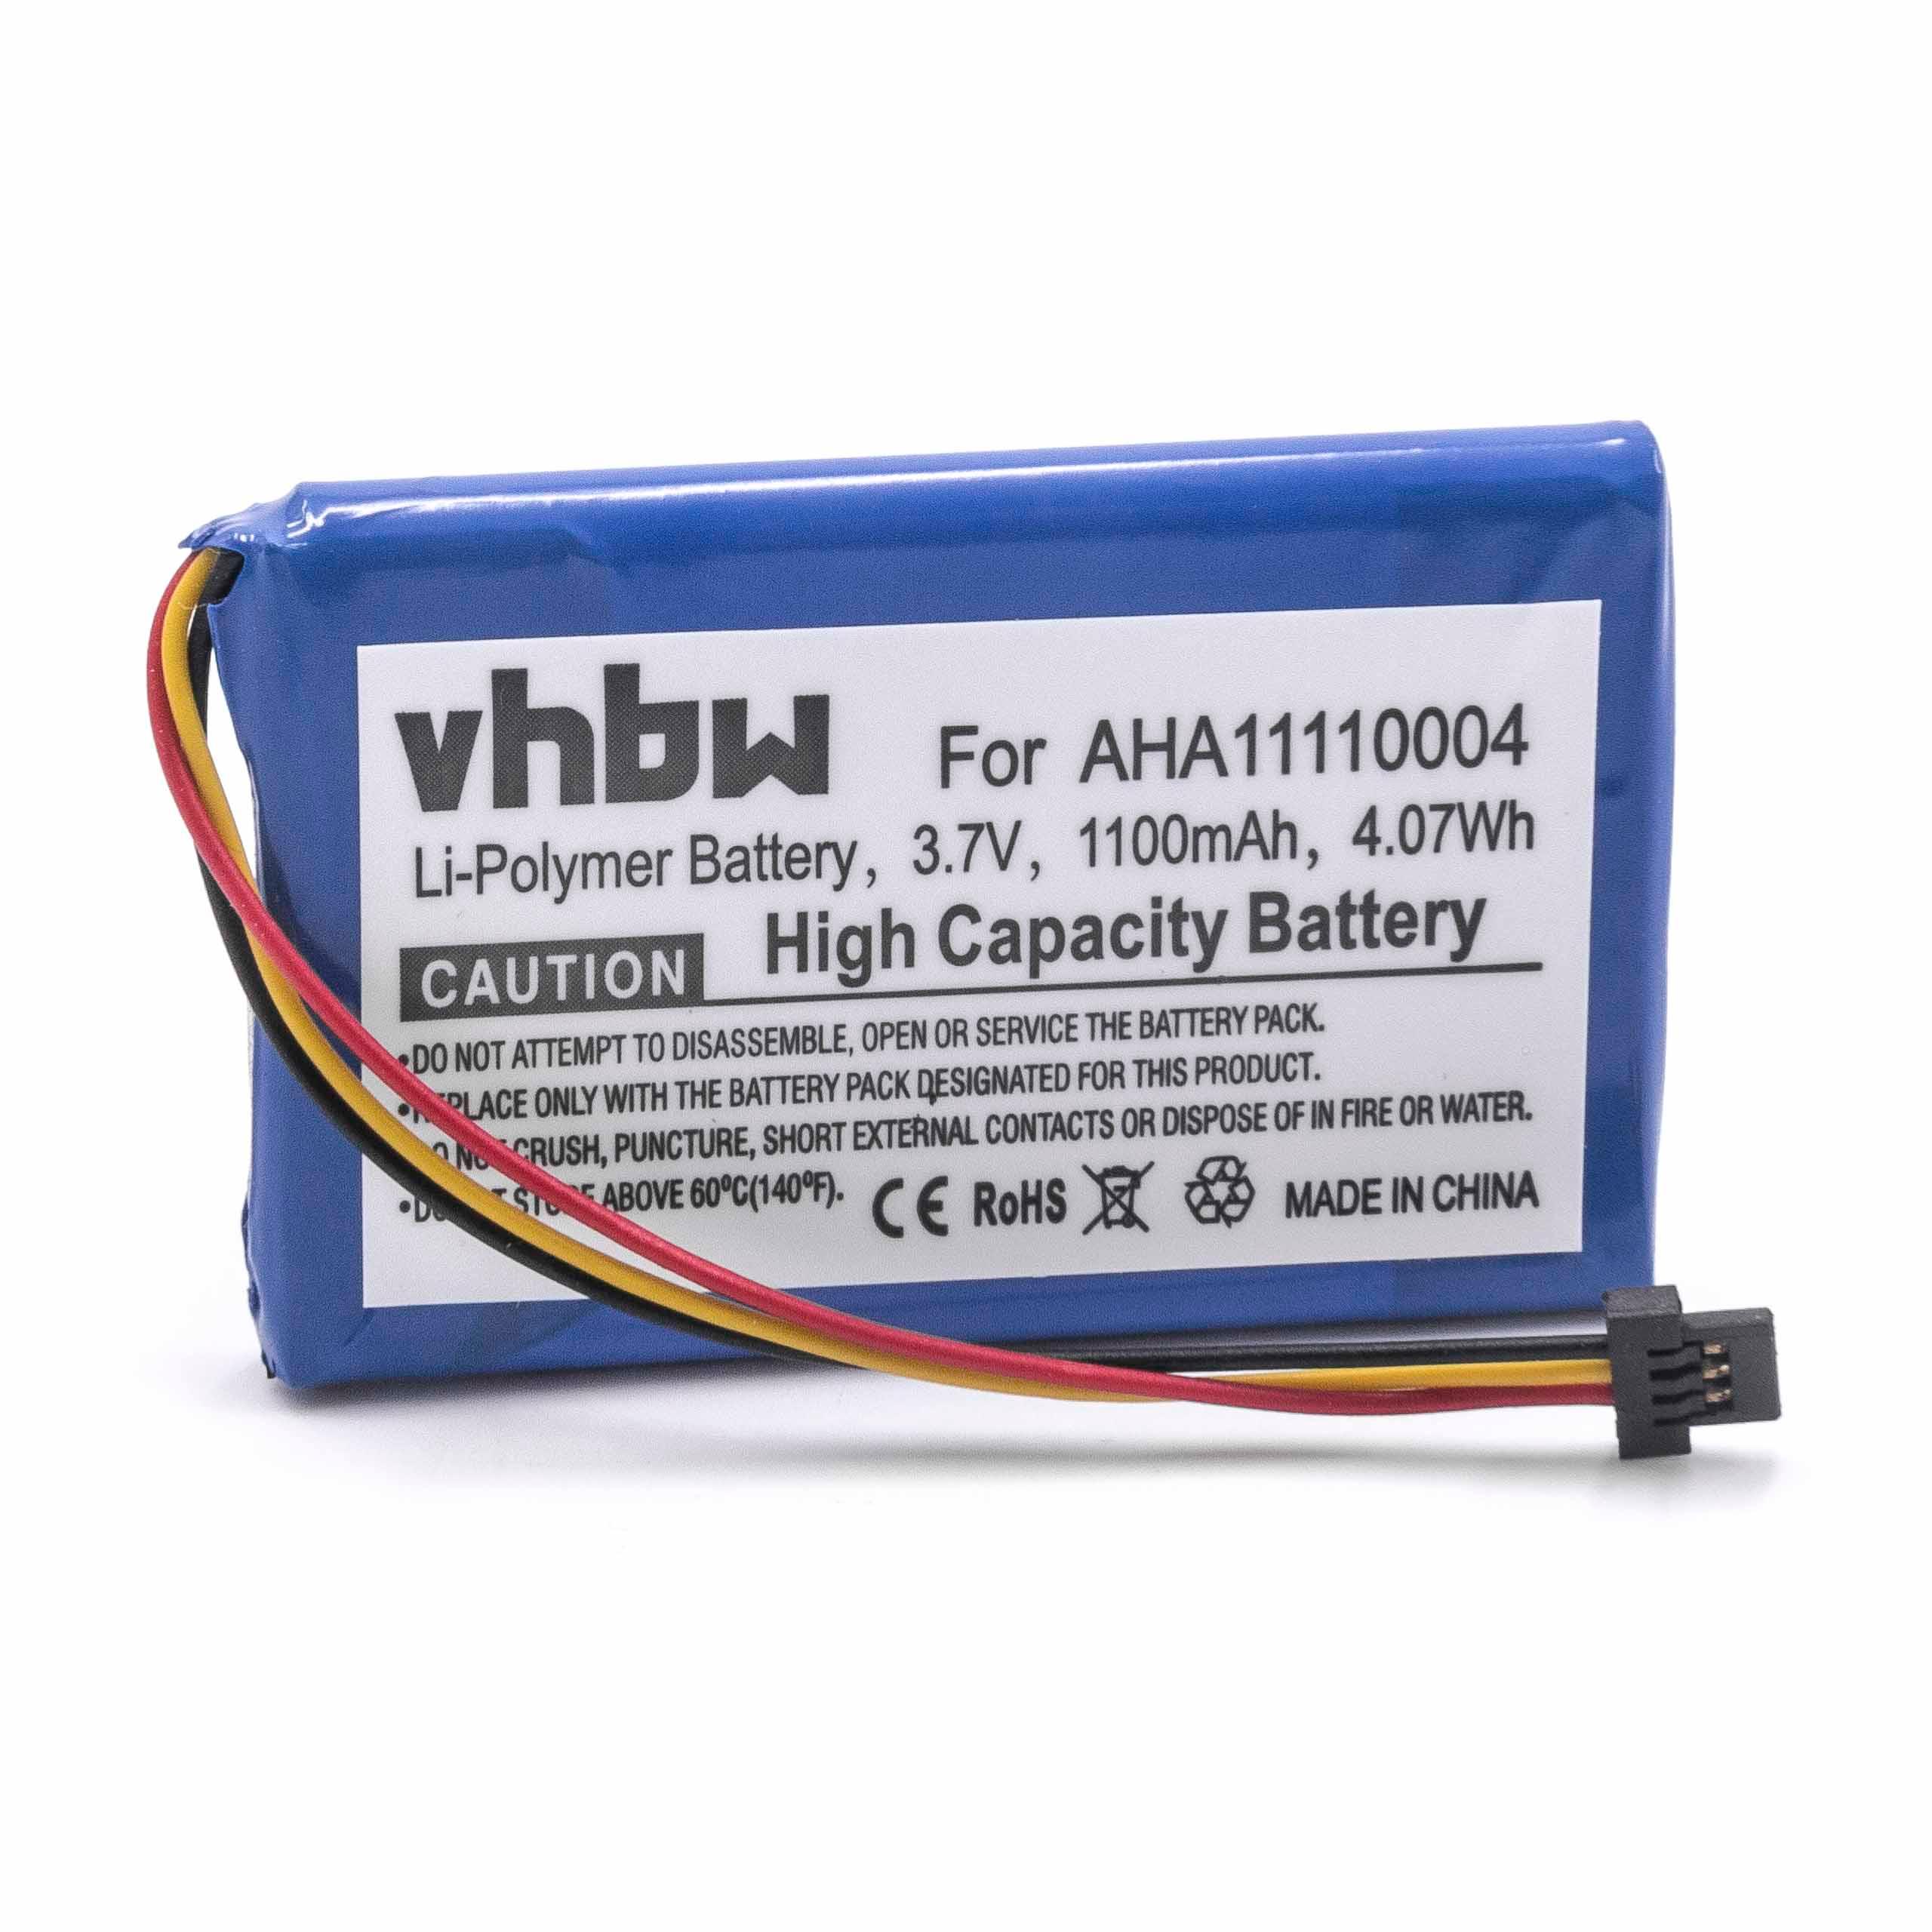 GPS Battery Replacement for TomTom P6, P5, AHA11110004 - 1100mAh, 3.7V